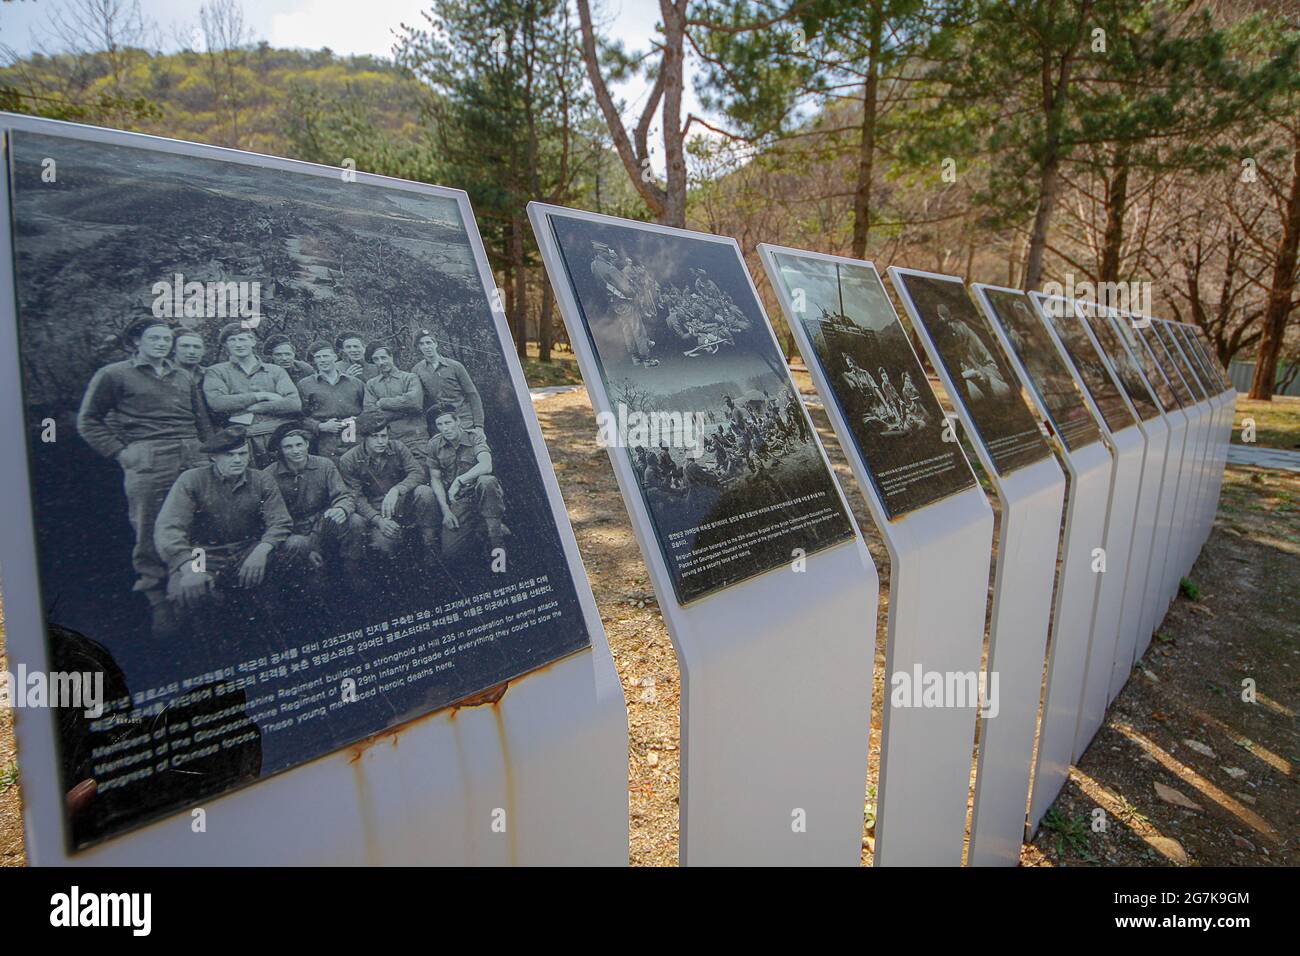 April 11, 2018-Goyang, South Korea-A View of Korean War England contingent monument of Gloster Hill Memorial Park in Paju, South Kroea. The memorial stands at the foot of Gloster Hill beside the Seolmacheon stream, the initial location of the Gloucestershire Regiment's headquarters during the battle at Imjin River. It was built by units of the British and South Korean armed forces as a memorial to the Gloucestershire Regiment and C Troop, 170th Mortar Battery, Royal Artillery. Stock Photo